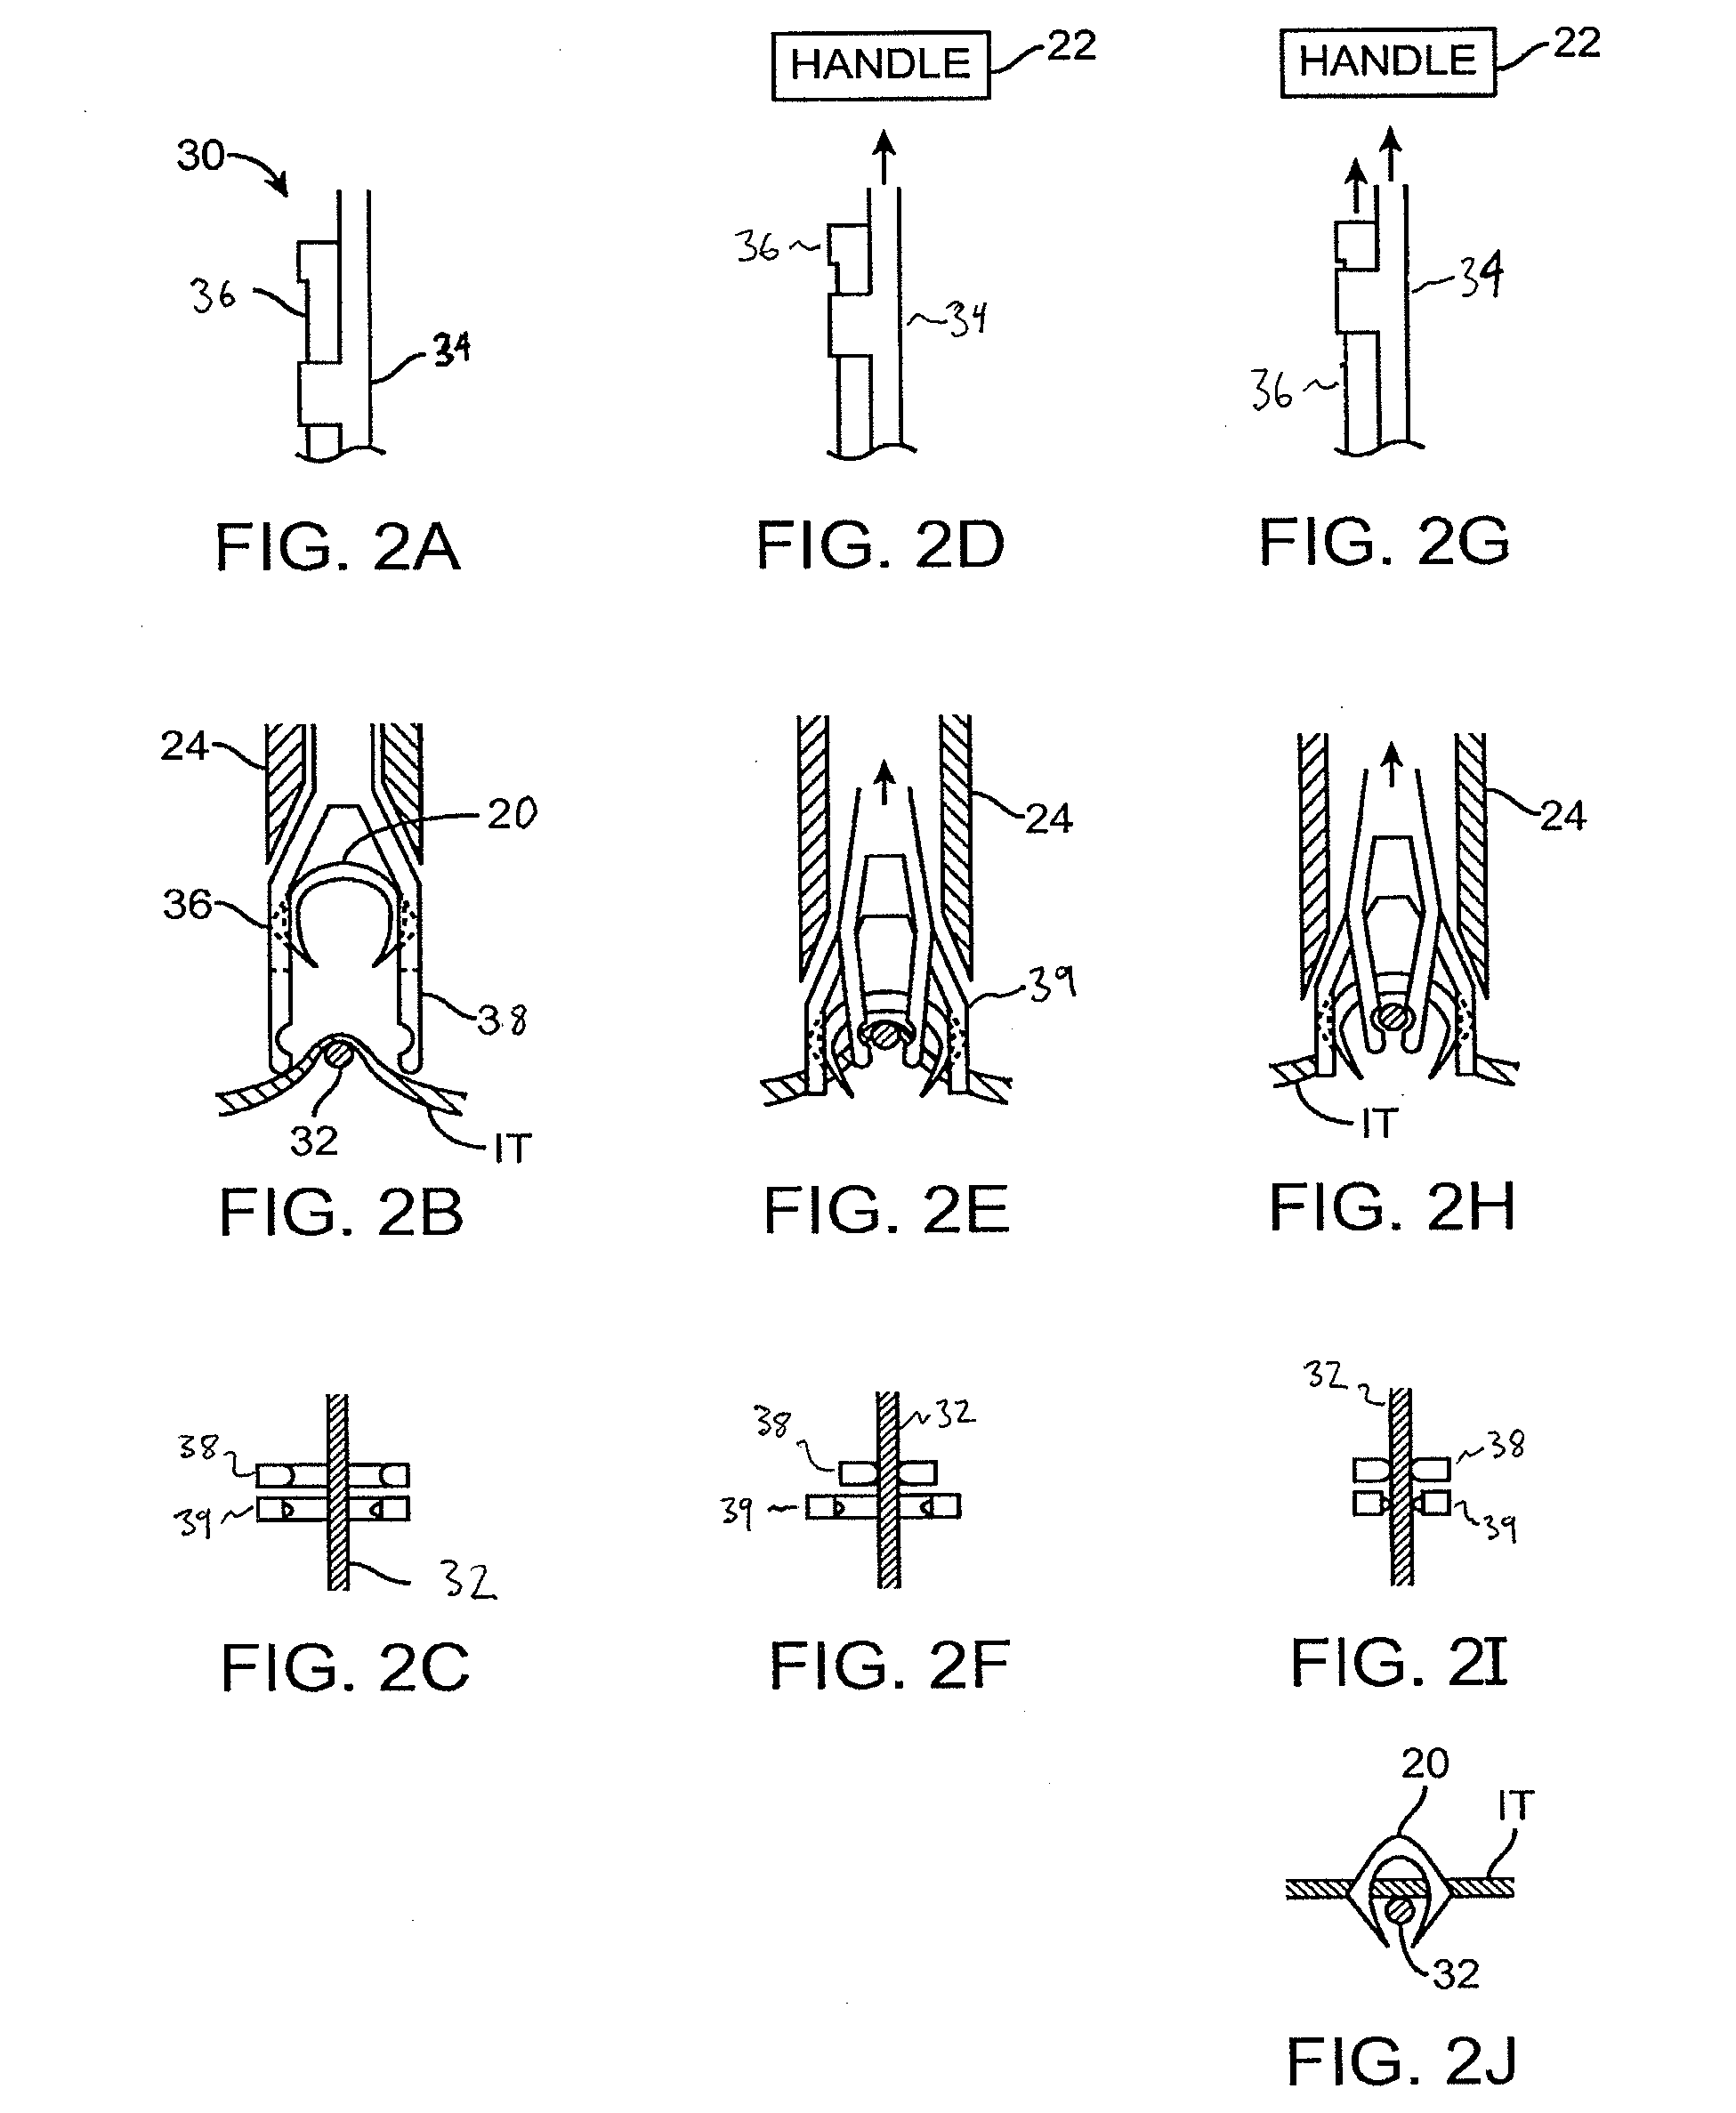 Fasteners, Deployment Systems, and Methods for Ophthalmic Tissue Closure and Fixation of Ophthalmic Prostheses and Other Uses